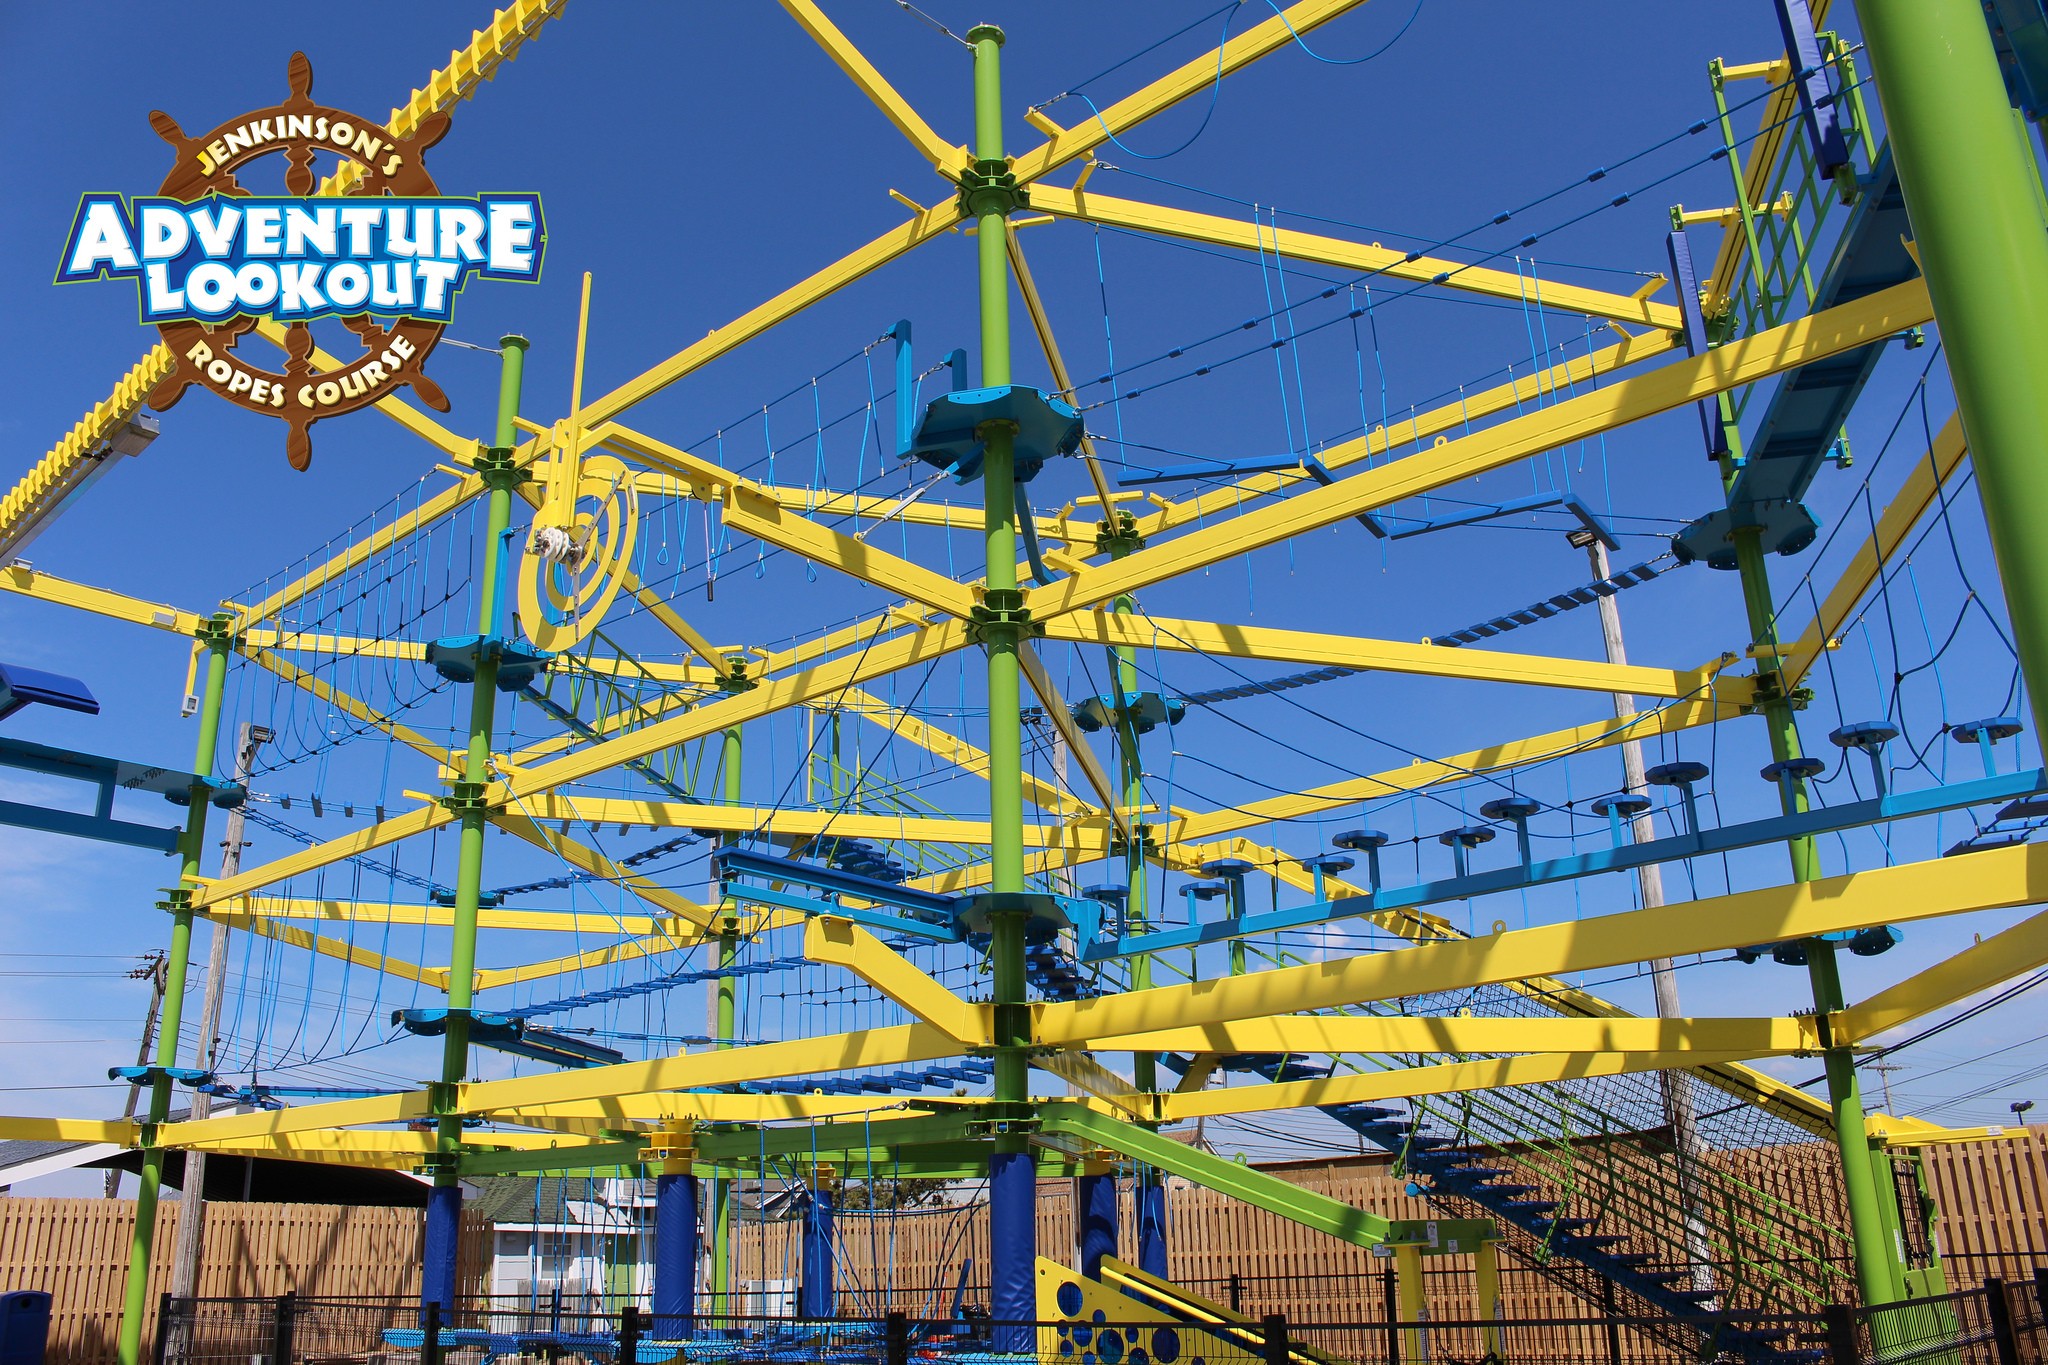 The Adventure Lookout Ropes Course at Jenkinson's Boardwalk.